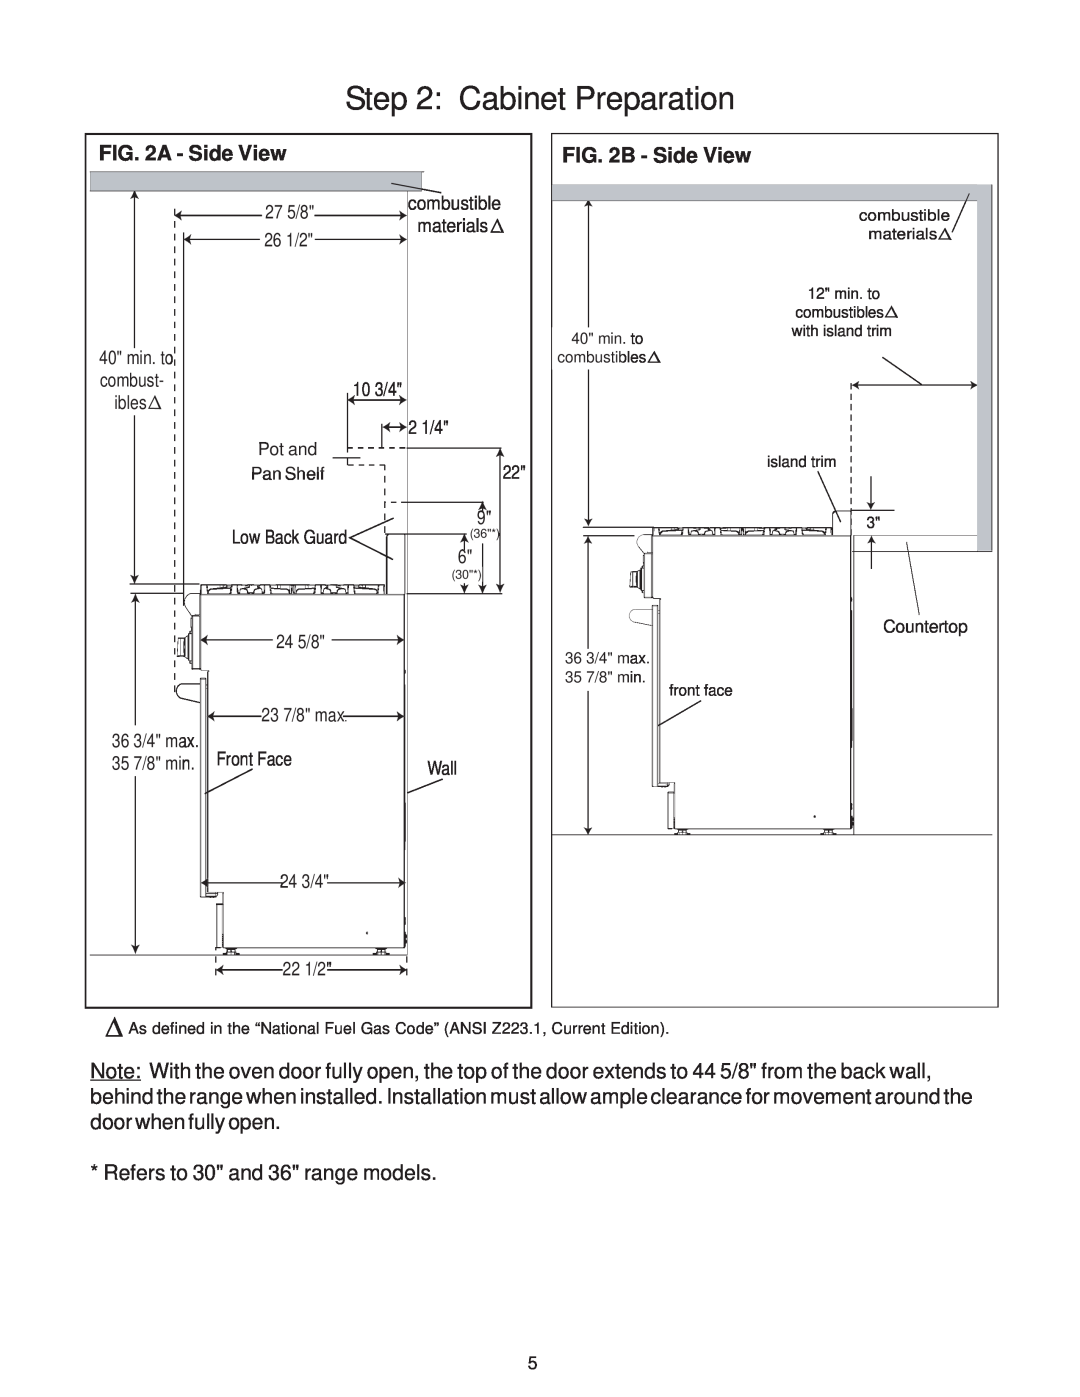 Thermador P30 installation instructions A - Side View, B - Side View, Cabinet Preparation 